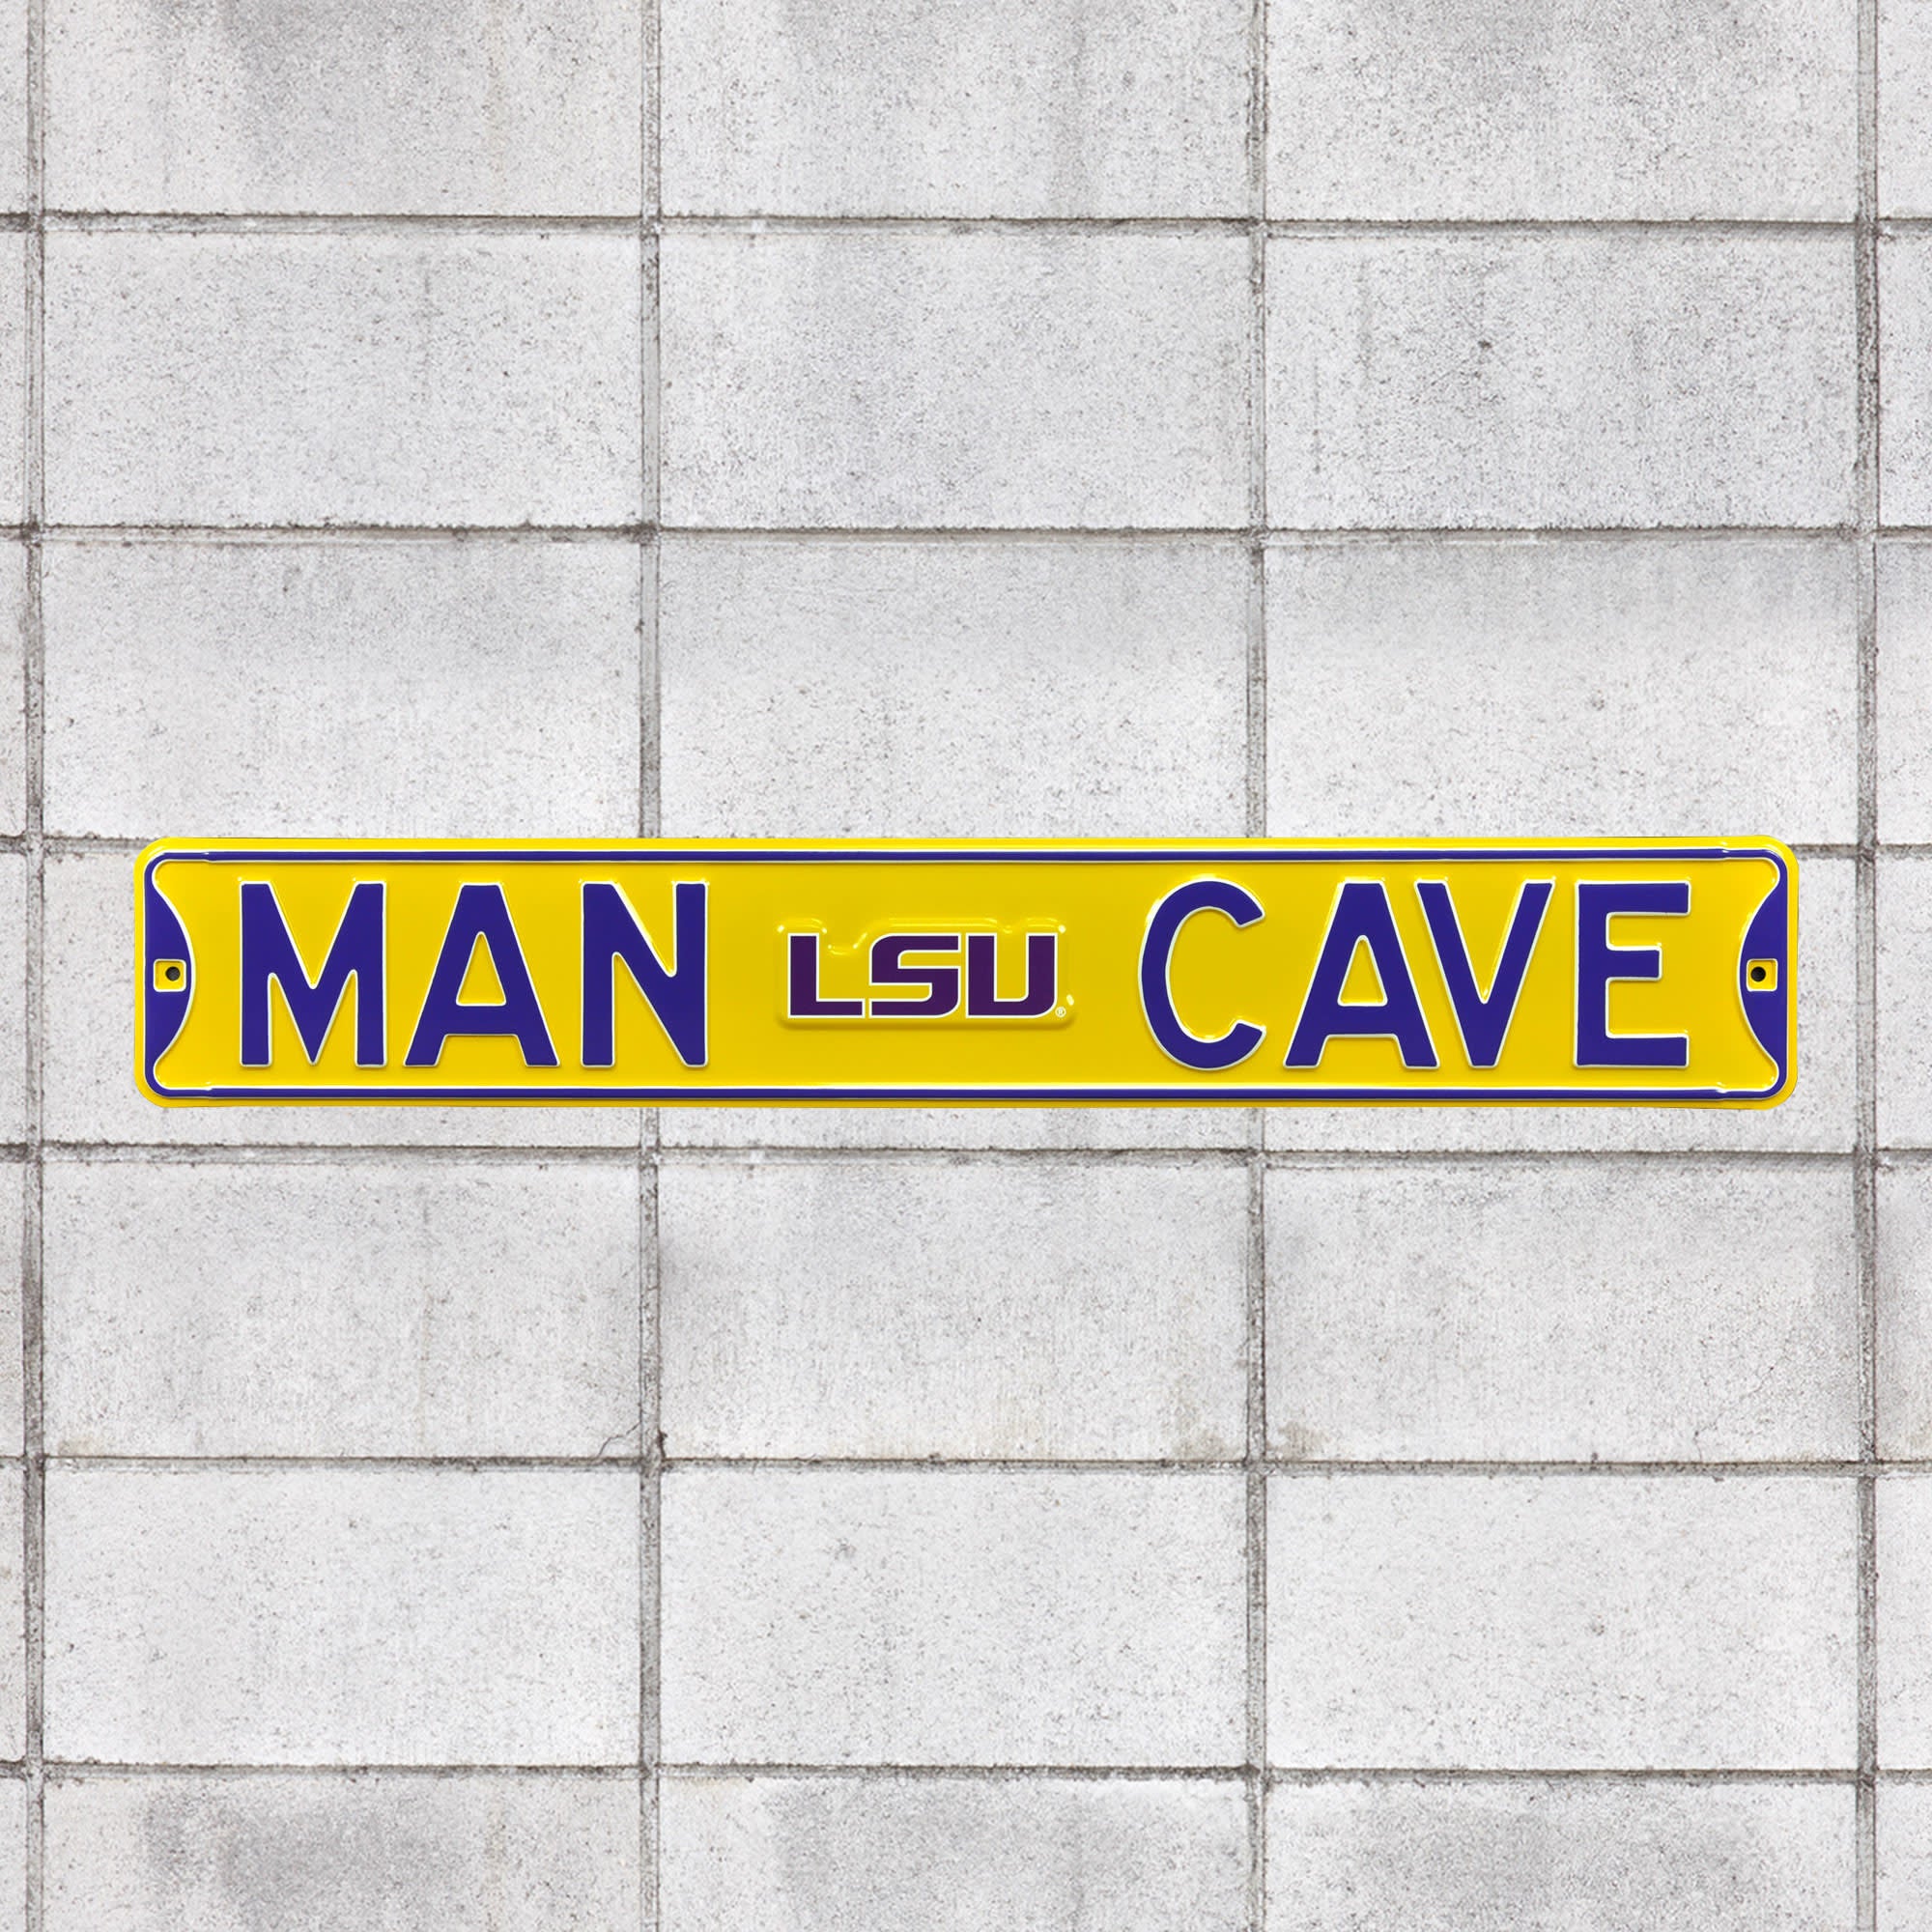 LSU Tigers: Man Cave - Officially Licensed Metal Street Sign 36.0"W x 6.0"H by Fathead | 100% Steel